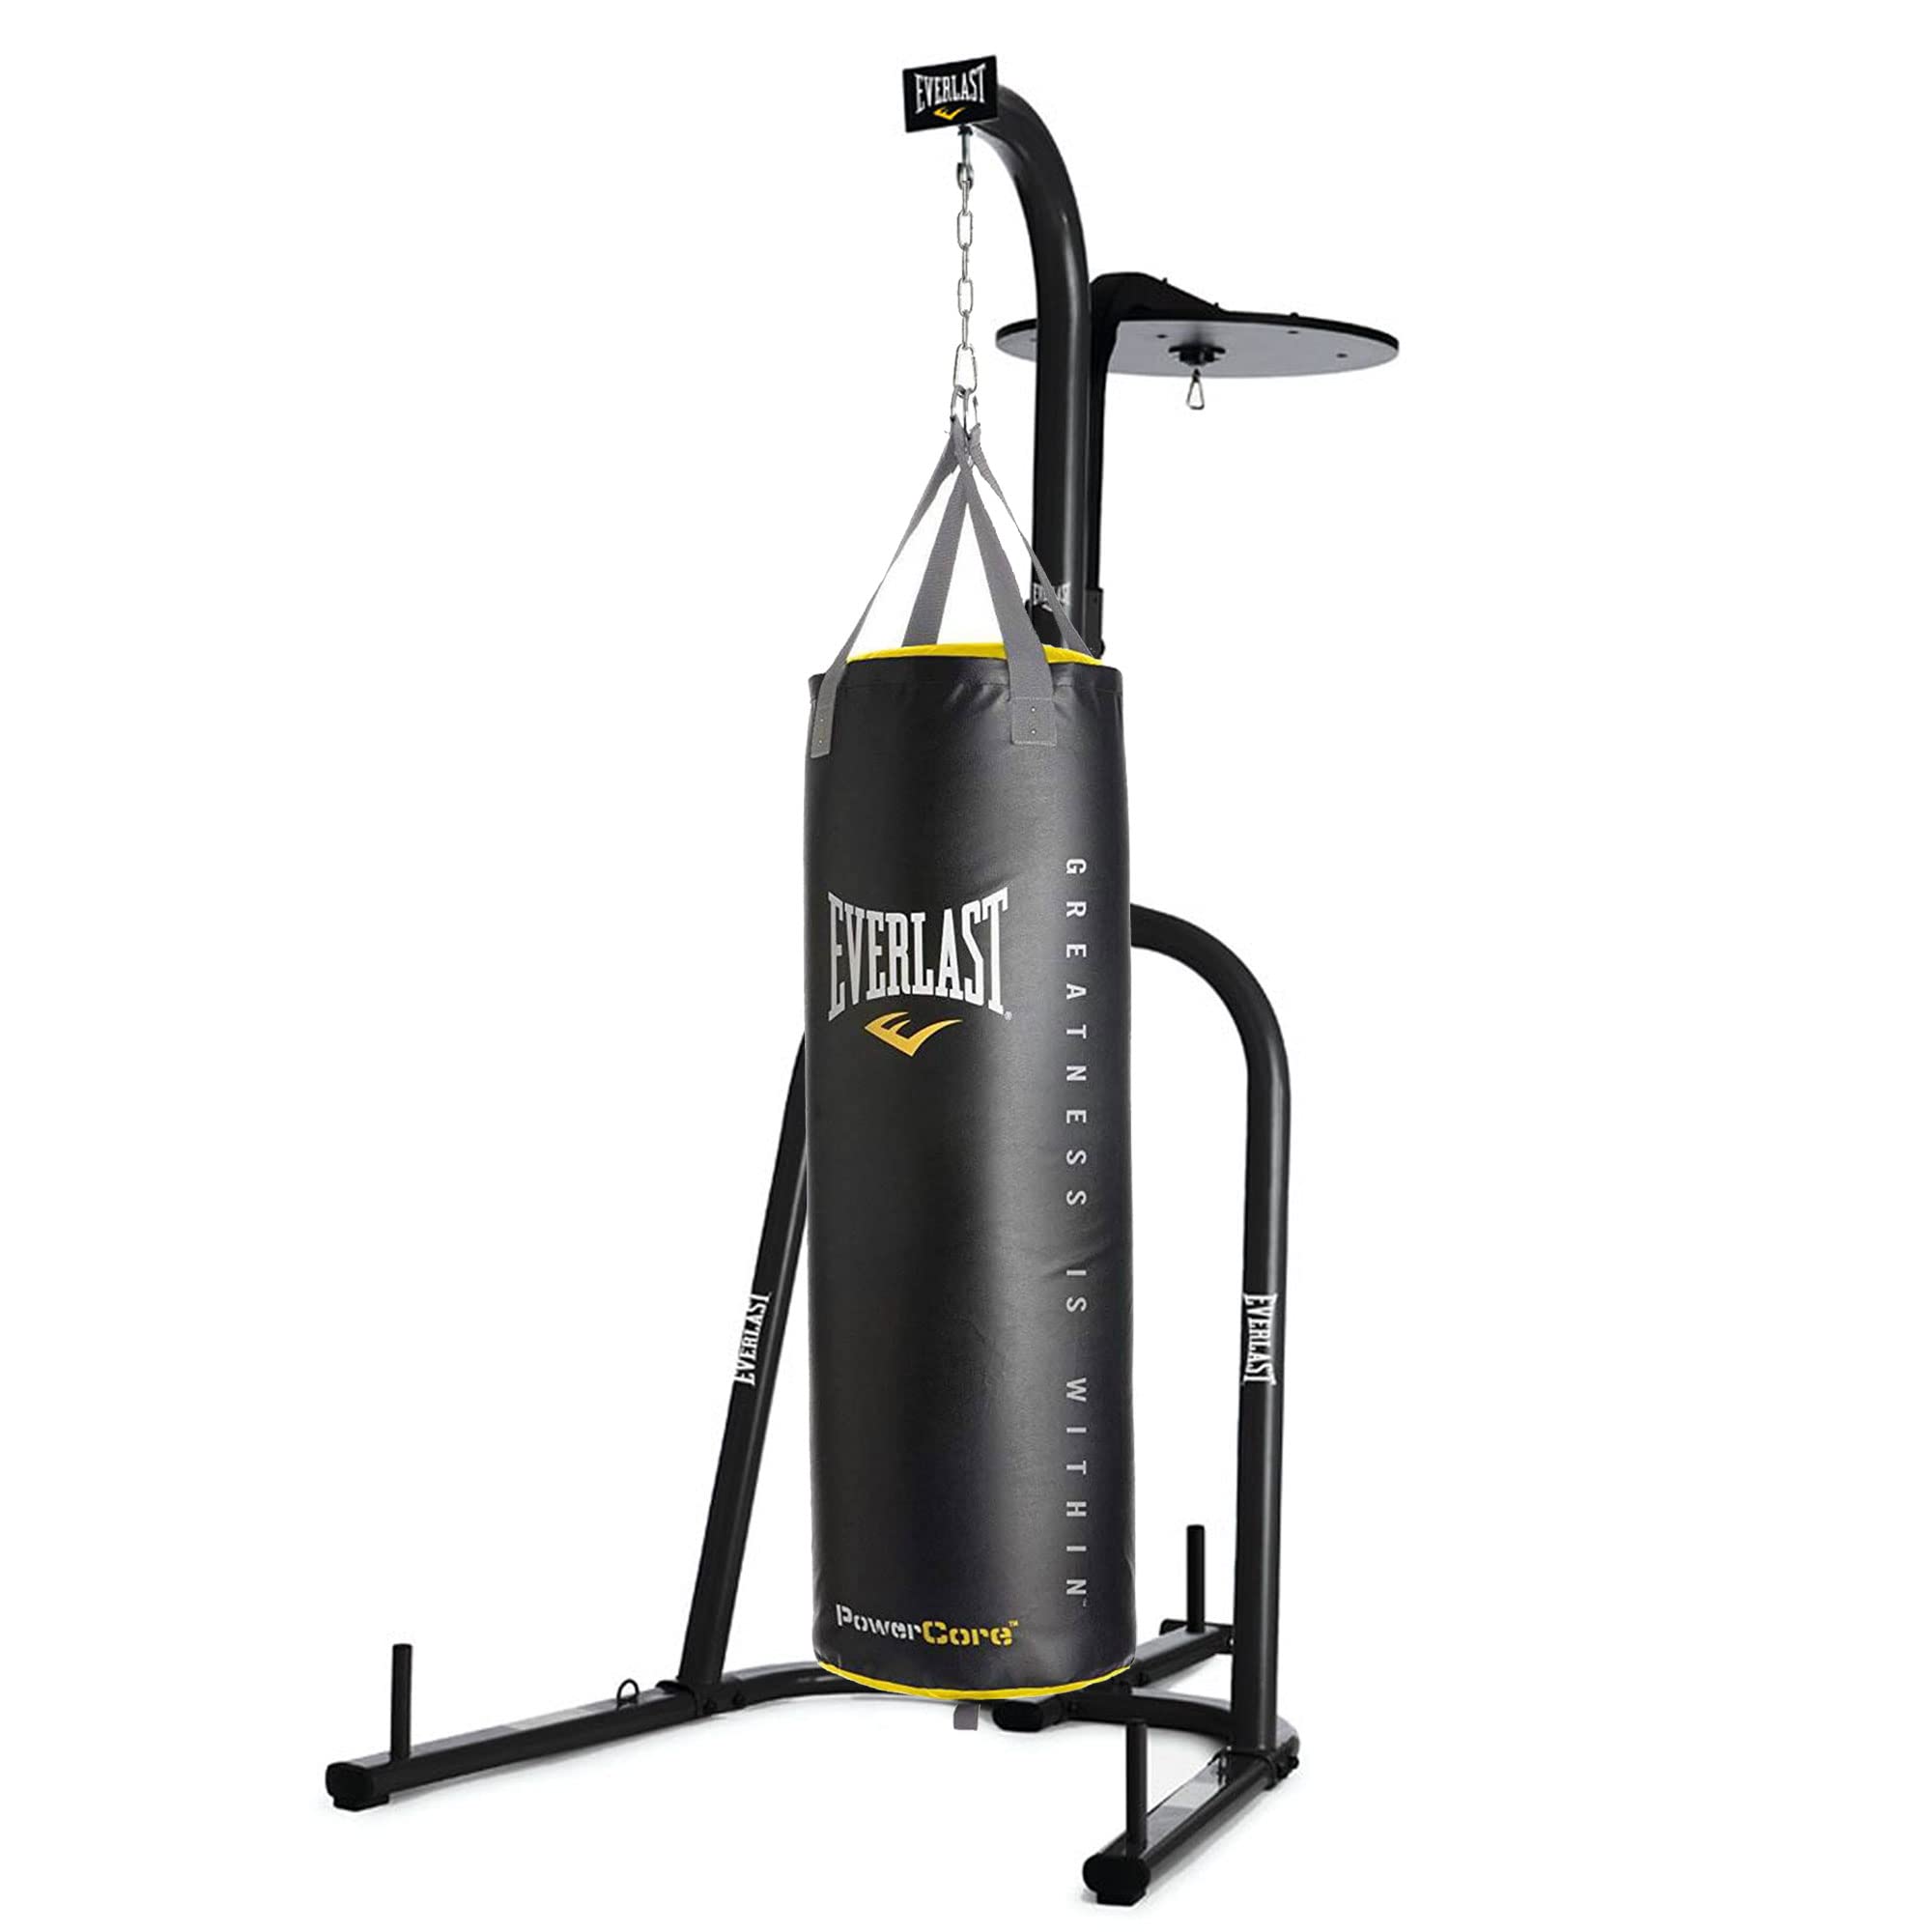 Everlast Powercore 100 Pound MMA Training Hanging Heavy Bag With Stand |  lupon.gov.ph